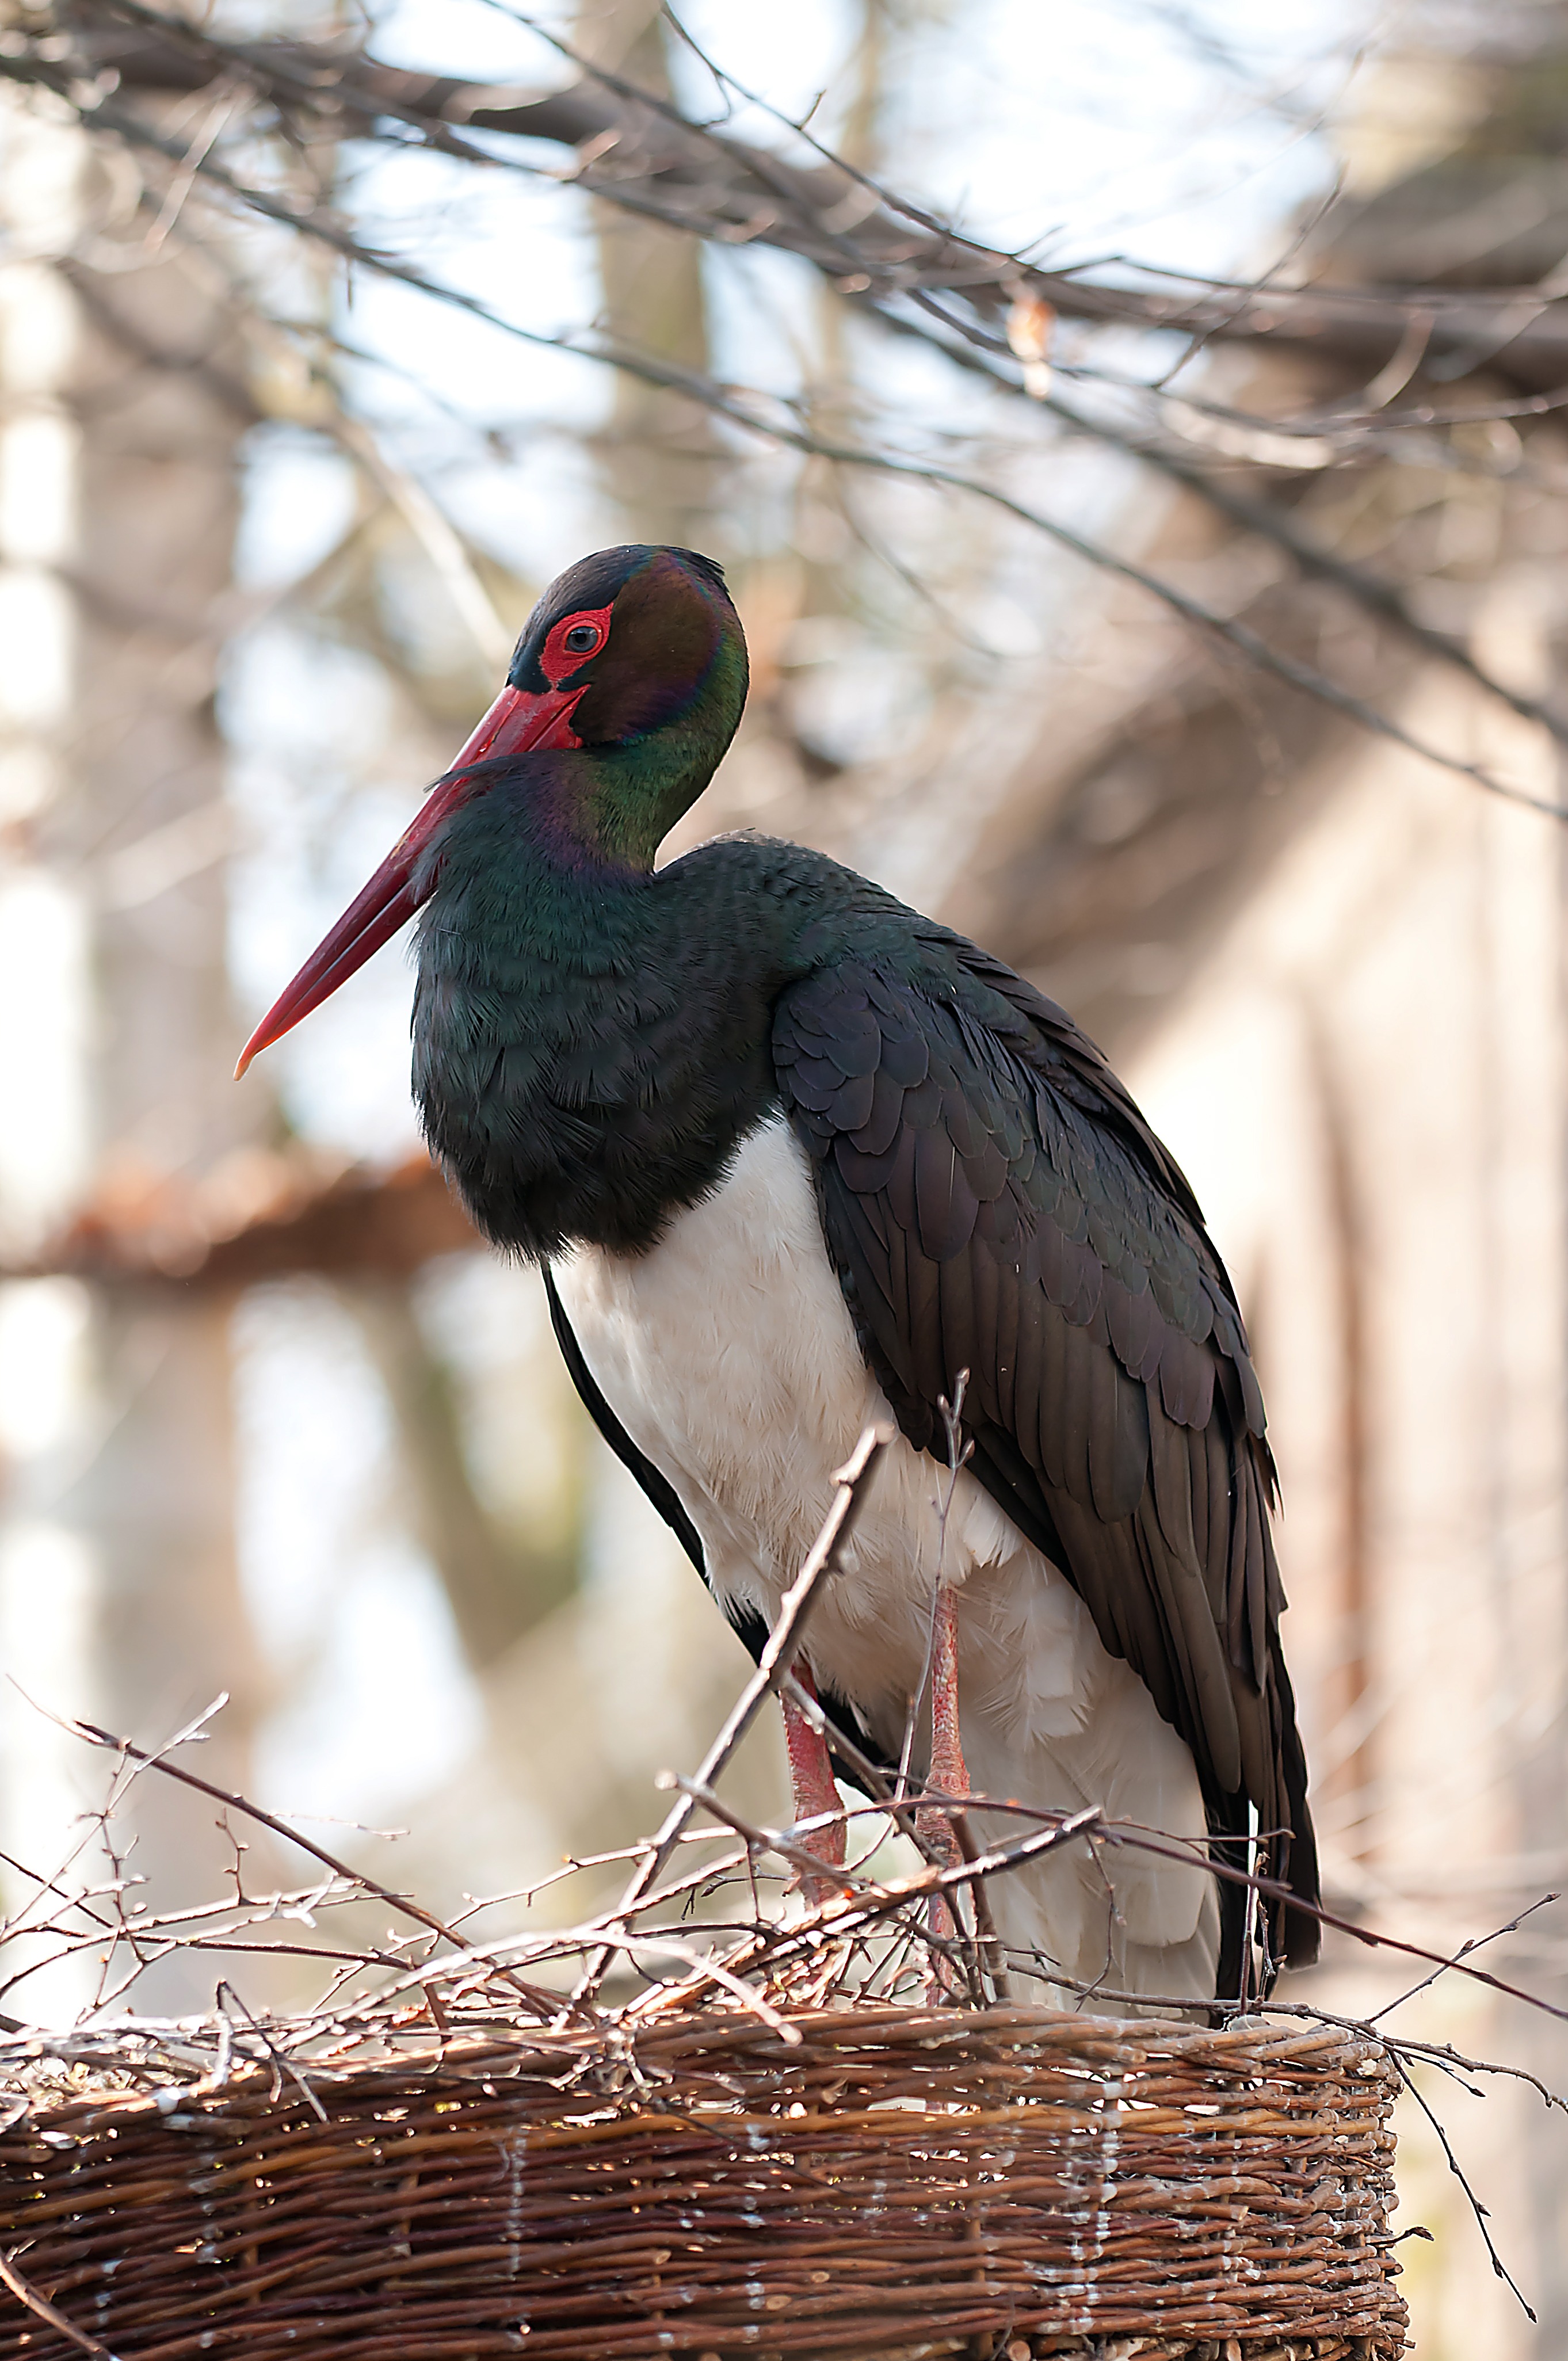 A black stork in a nest.